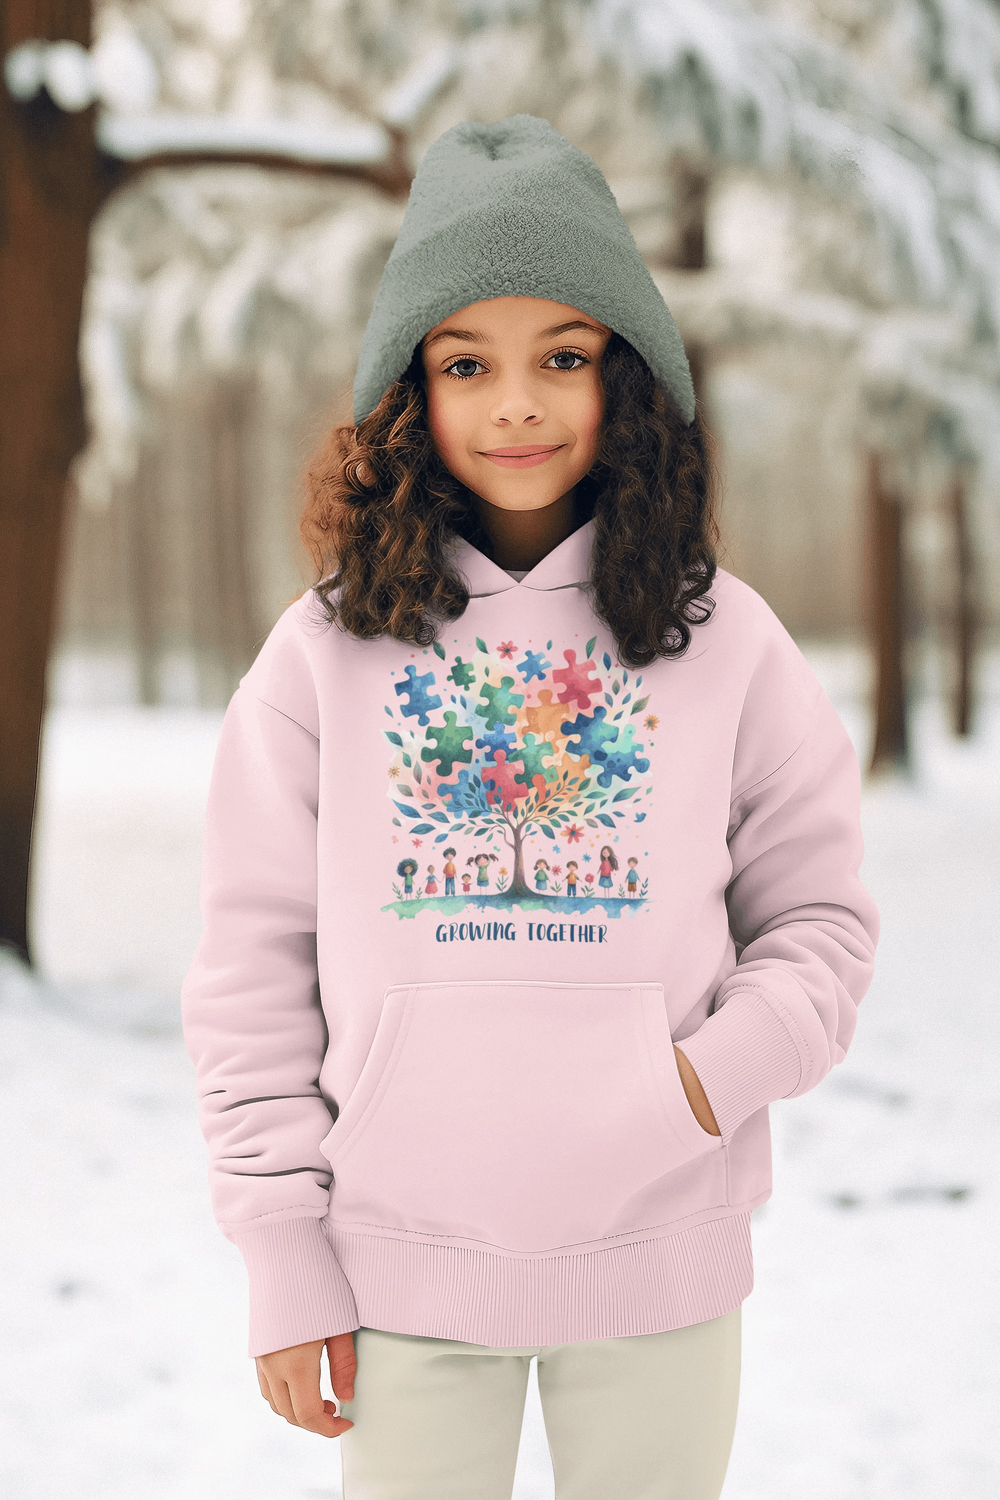 "Growing Together" Kids' Pullover Hoodie - Cozy Inclusivity